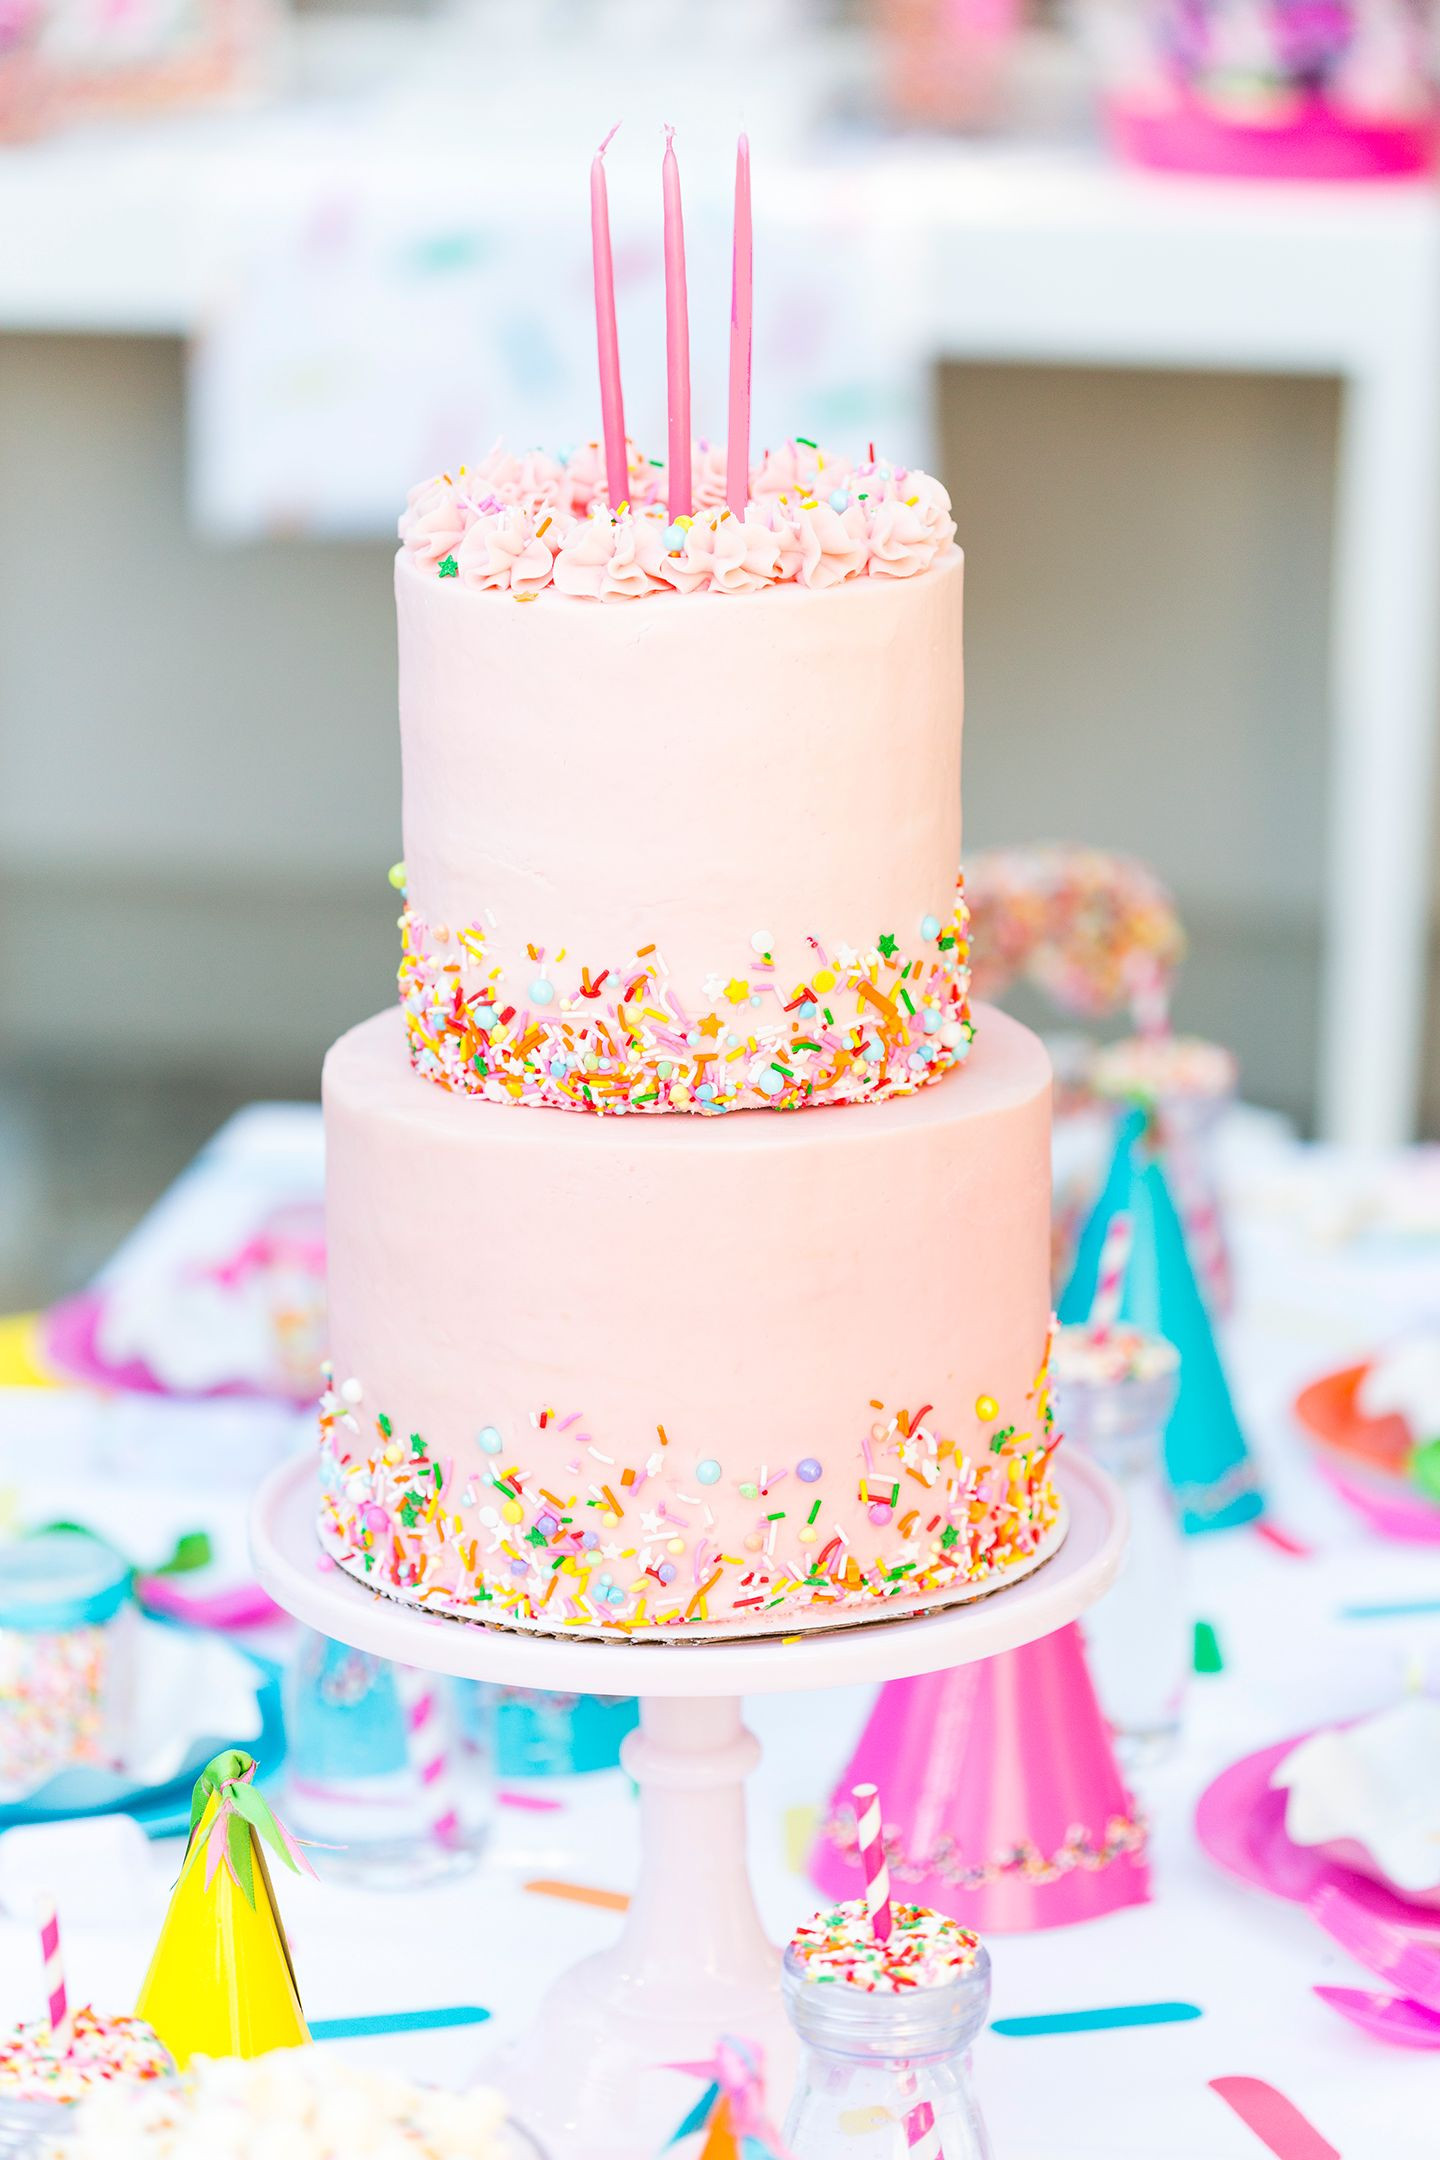 Cake Decorating Birthday Party
 Sprinkle Themed Birthday Party in 2019